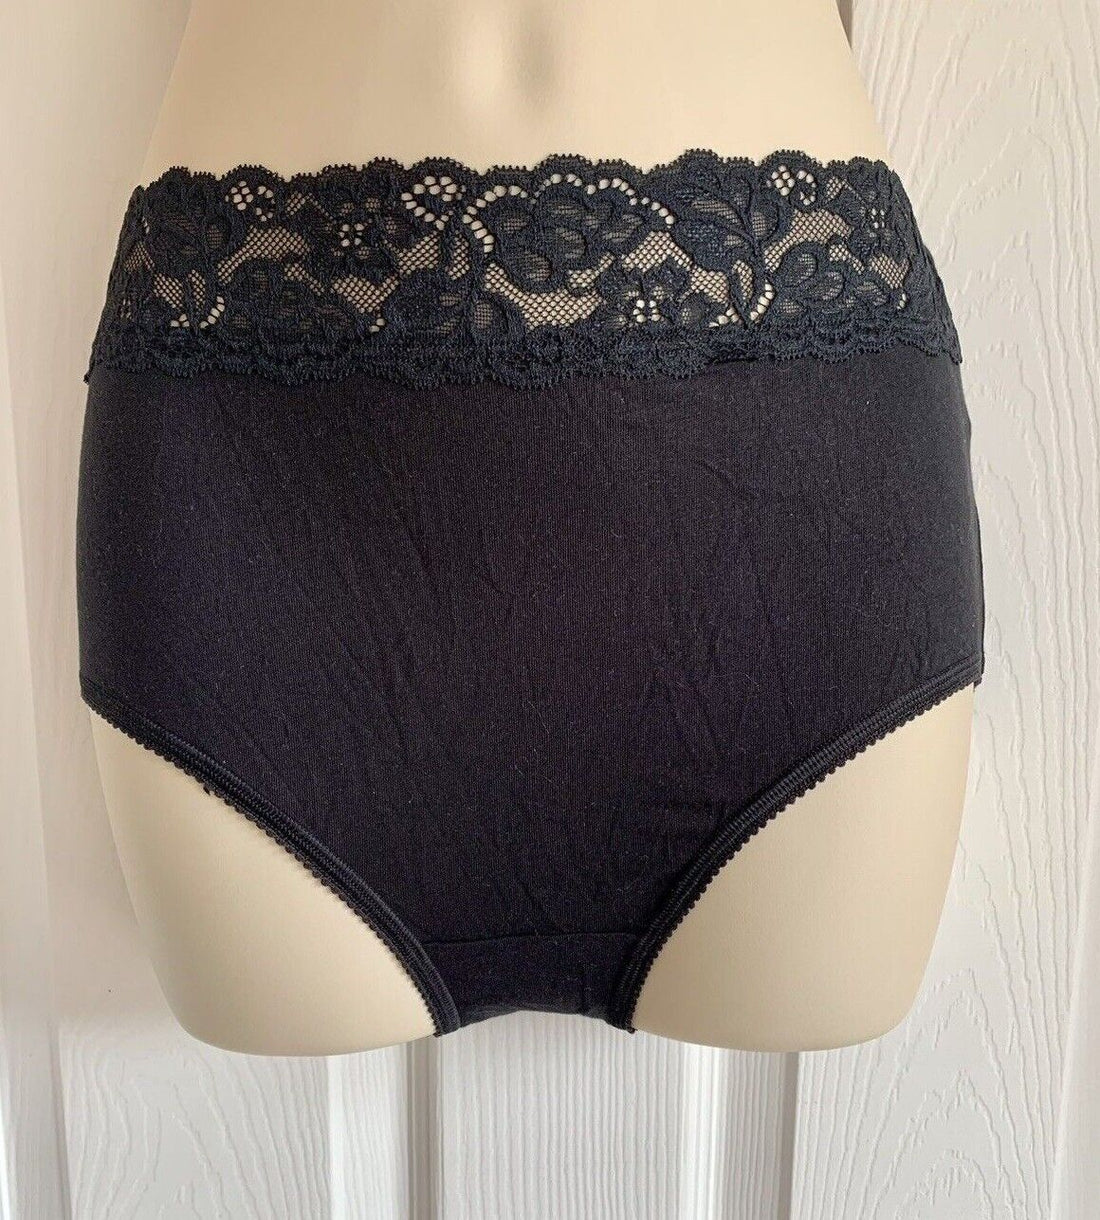 New Ex M&S Wild Bloom Lace High Rise Full Briefs Pink Almond Black White  Blue